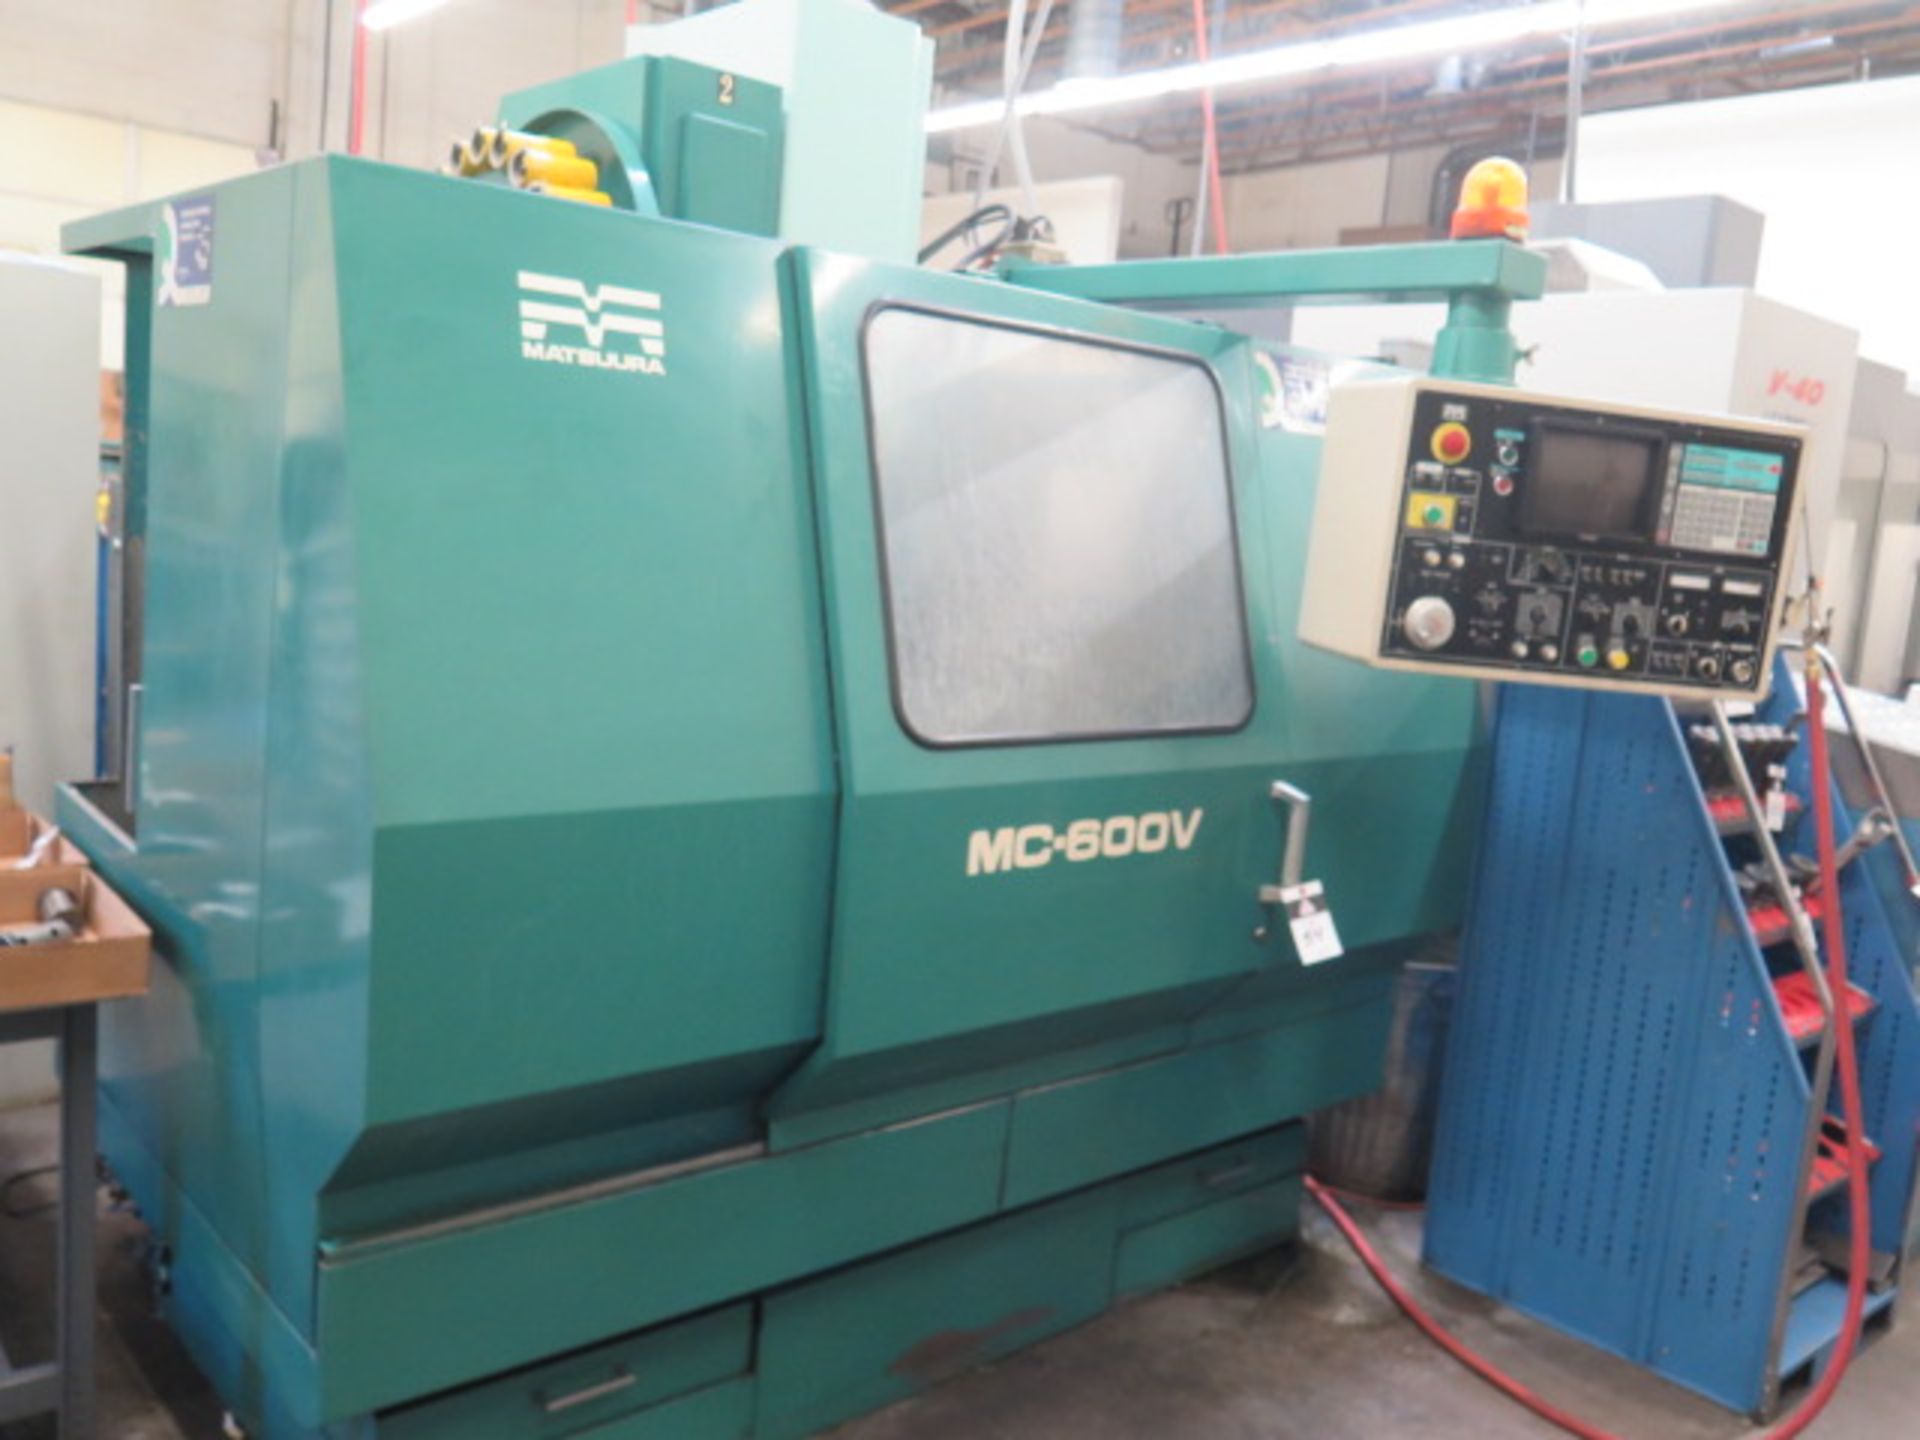 Matsuura MC-600V CNC Vertical Machining Center s/n 890607555 w/ Yasnac Controls, 20 ATC, SOLD AS IS - Image 2 of 14